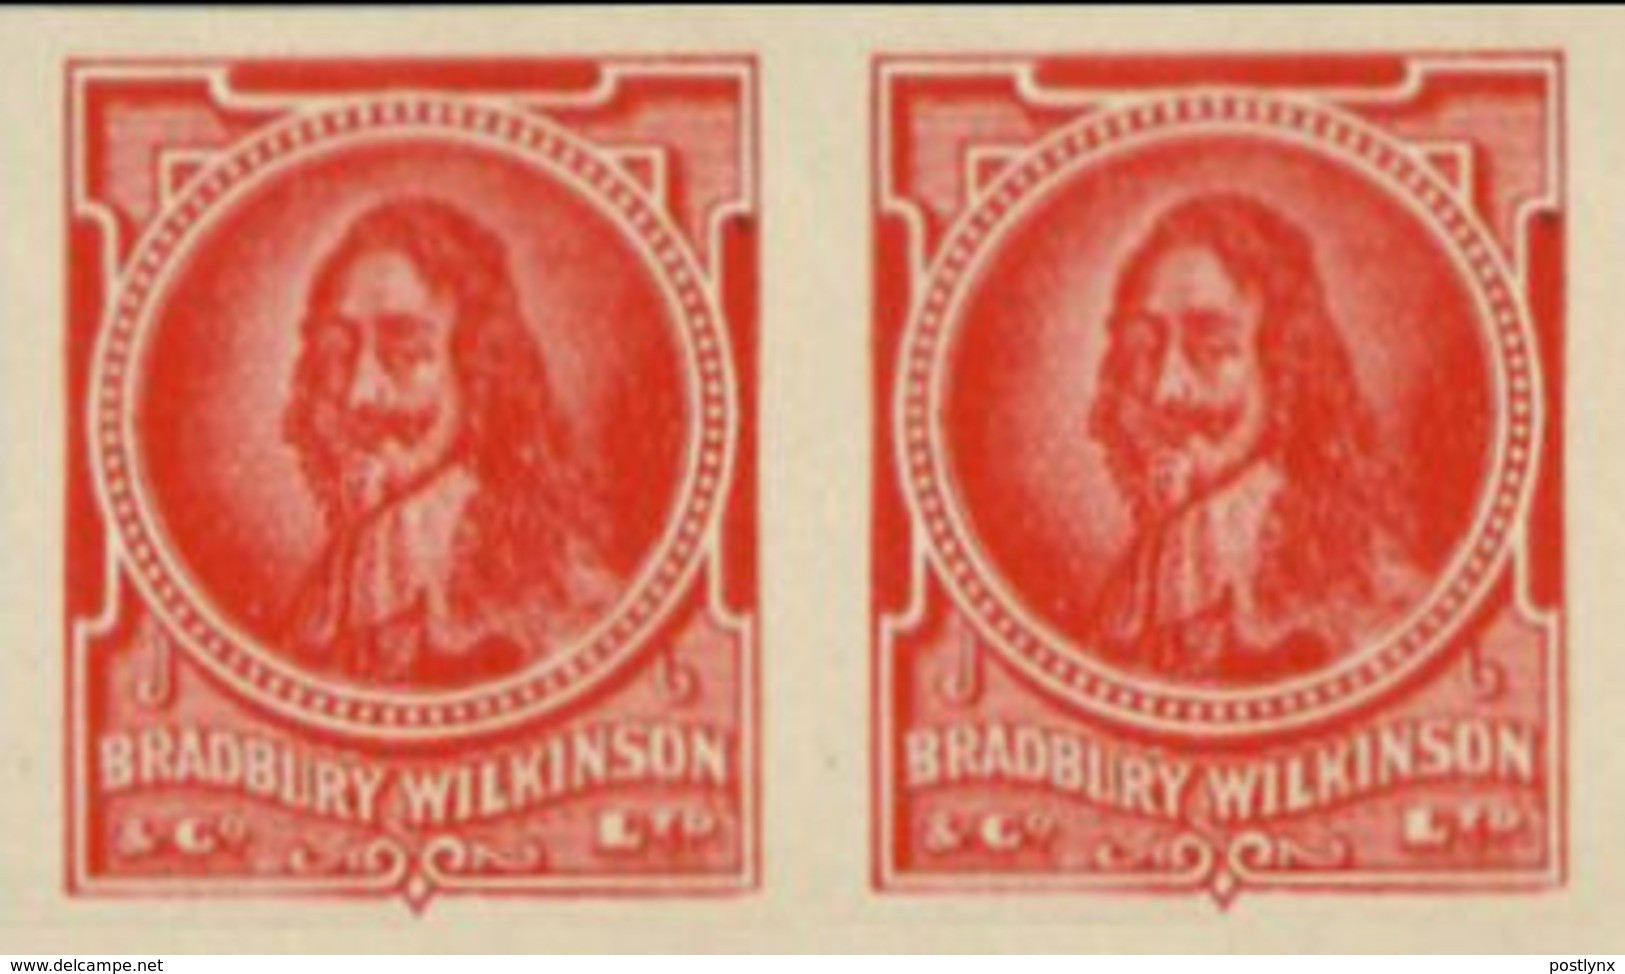 GREAT BRITAIN. Charles I. Red IMPERF.PAIR ESSAY Ungum. - Essays, Proofs & Reprints